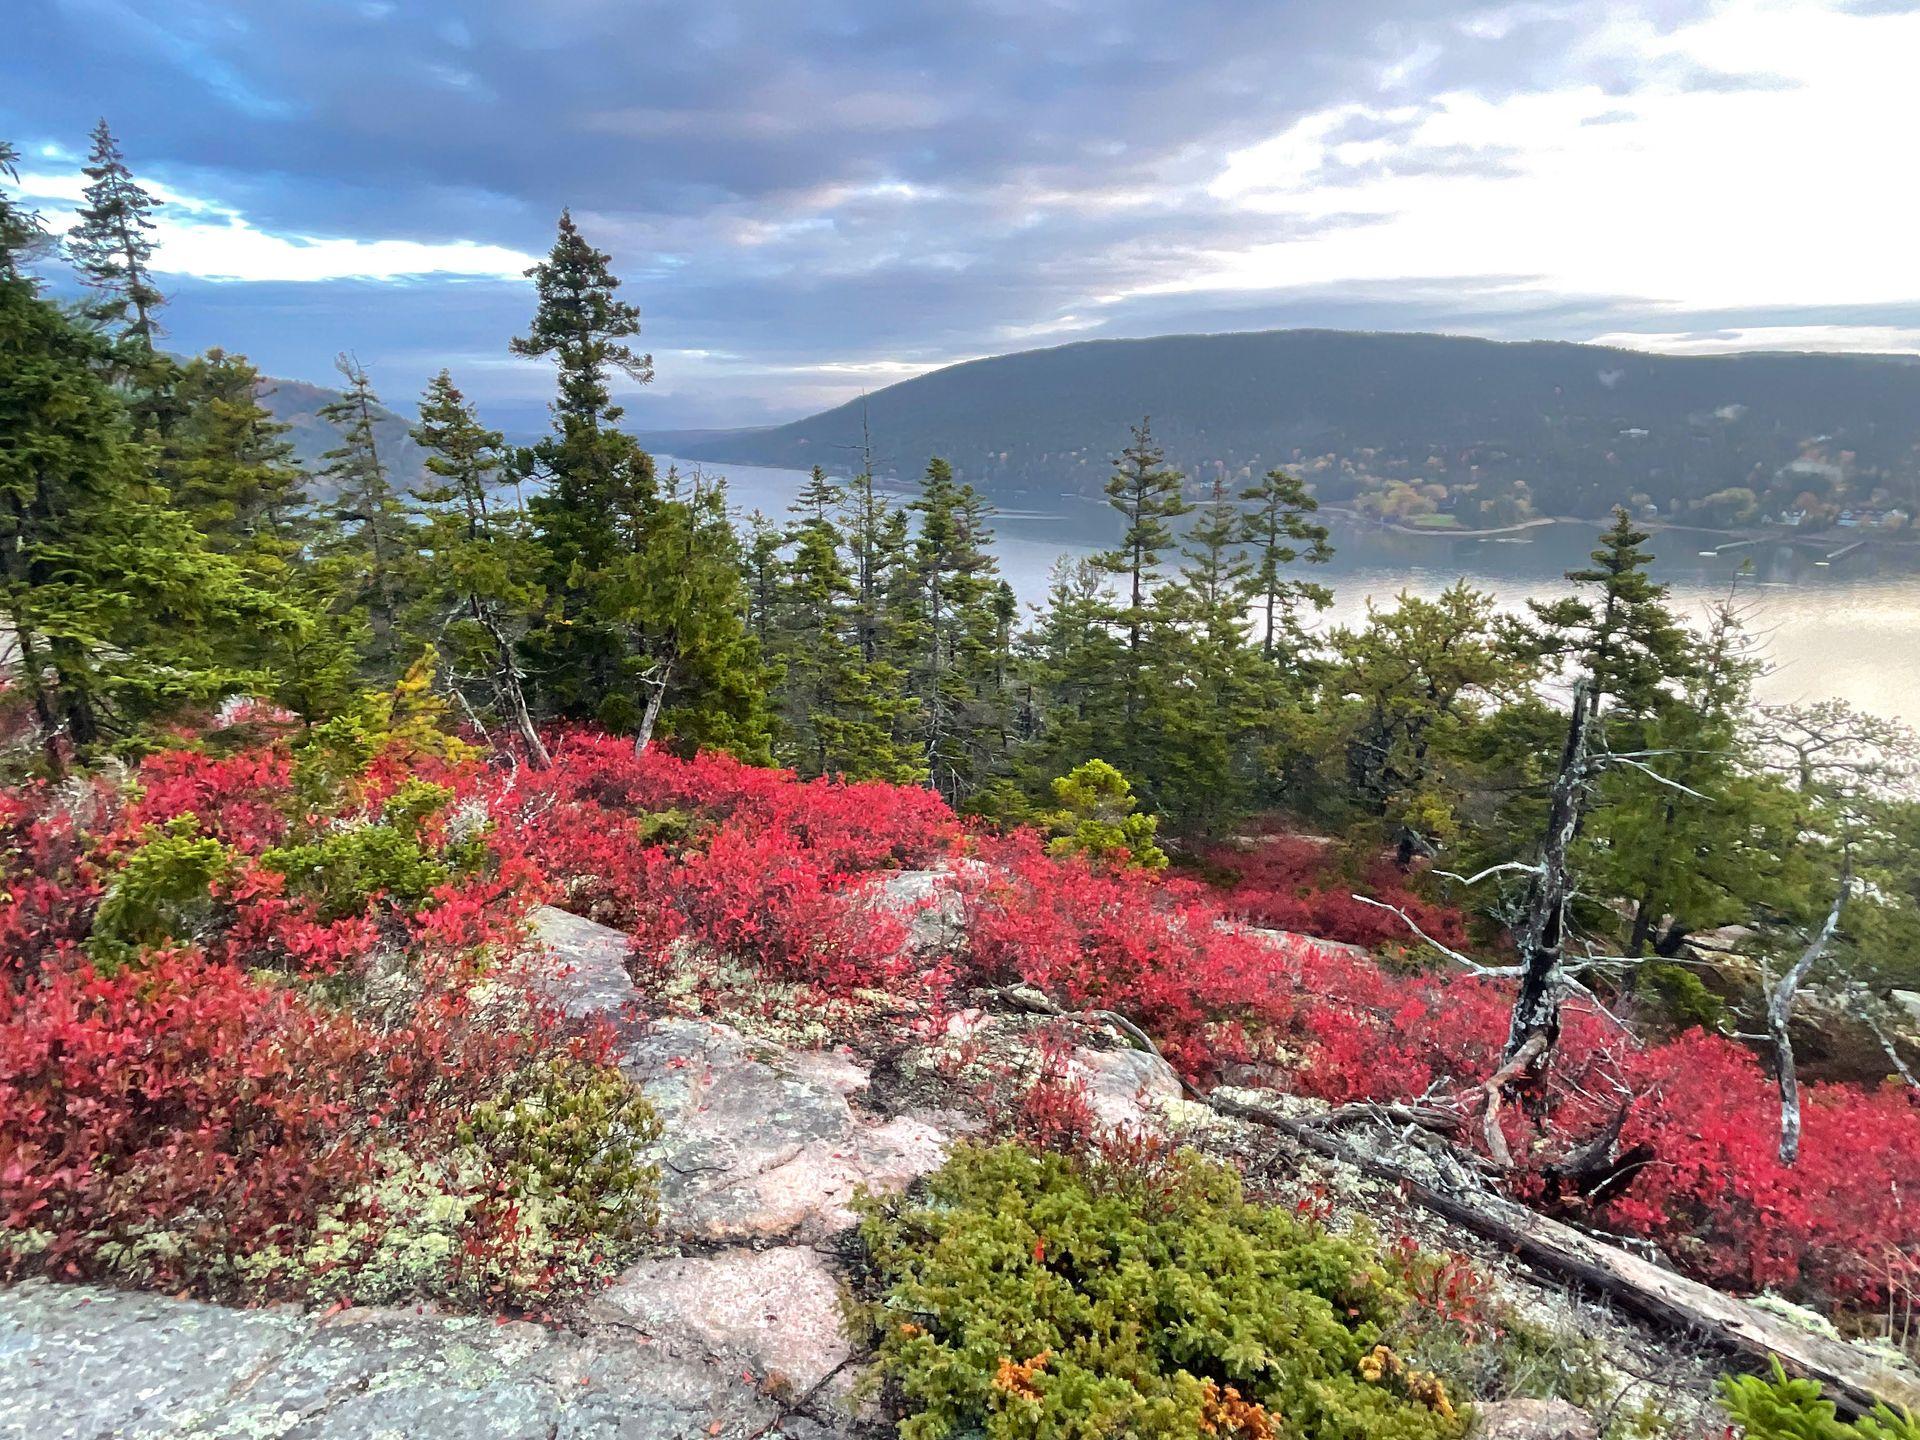 A view of red foliage and water in the distance on the Flying Mountain trail